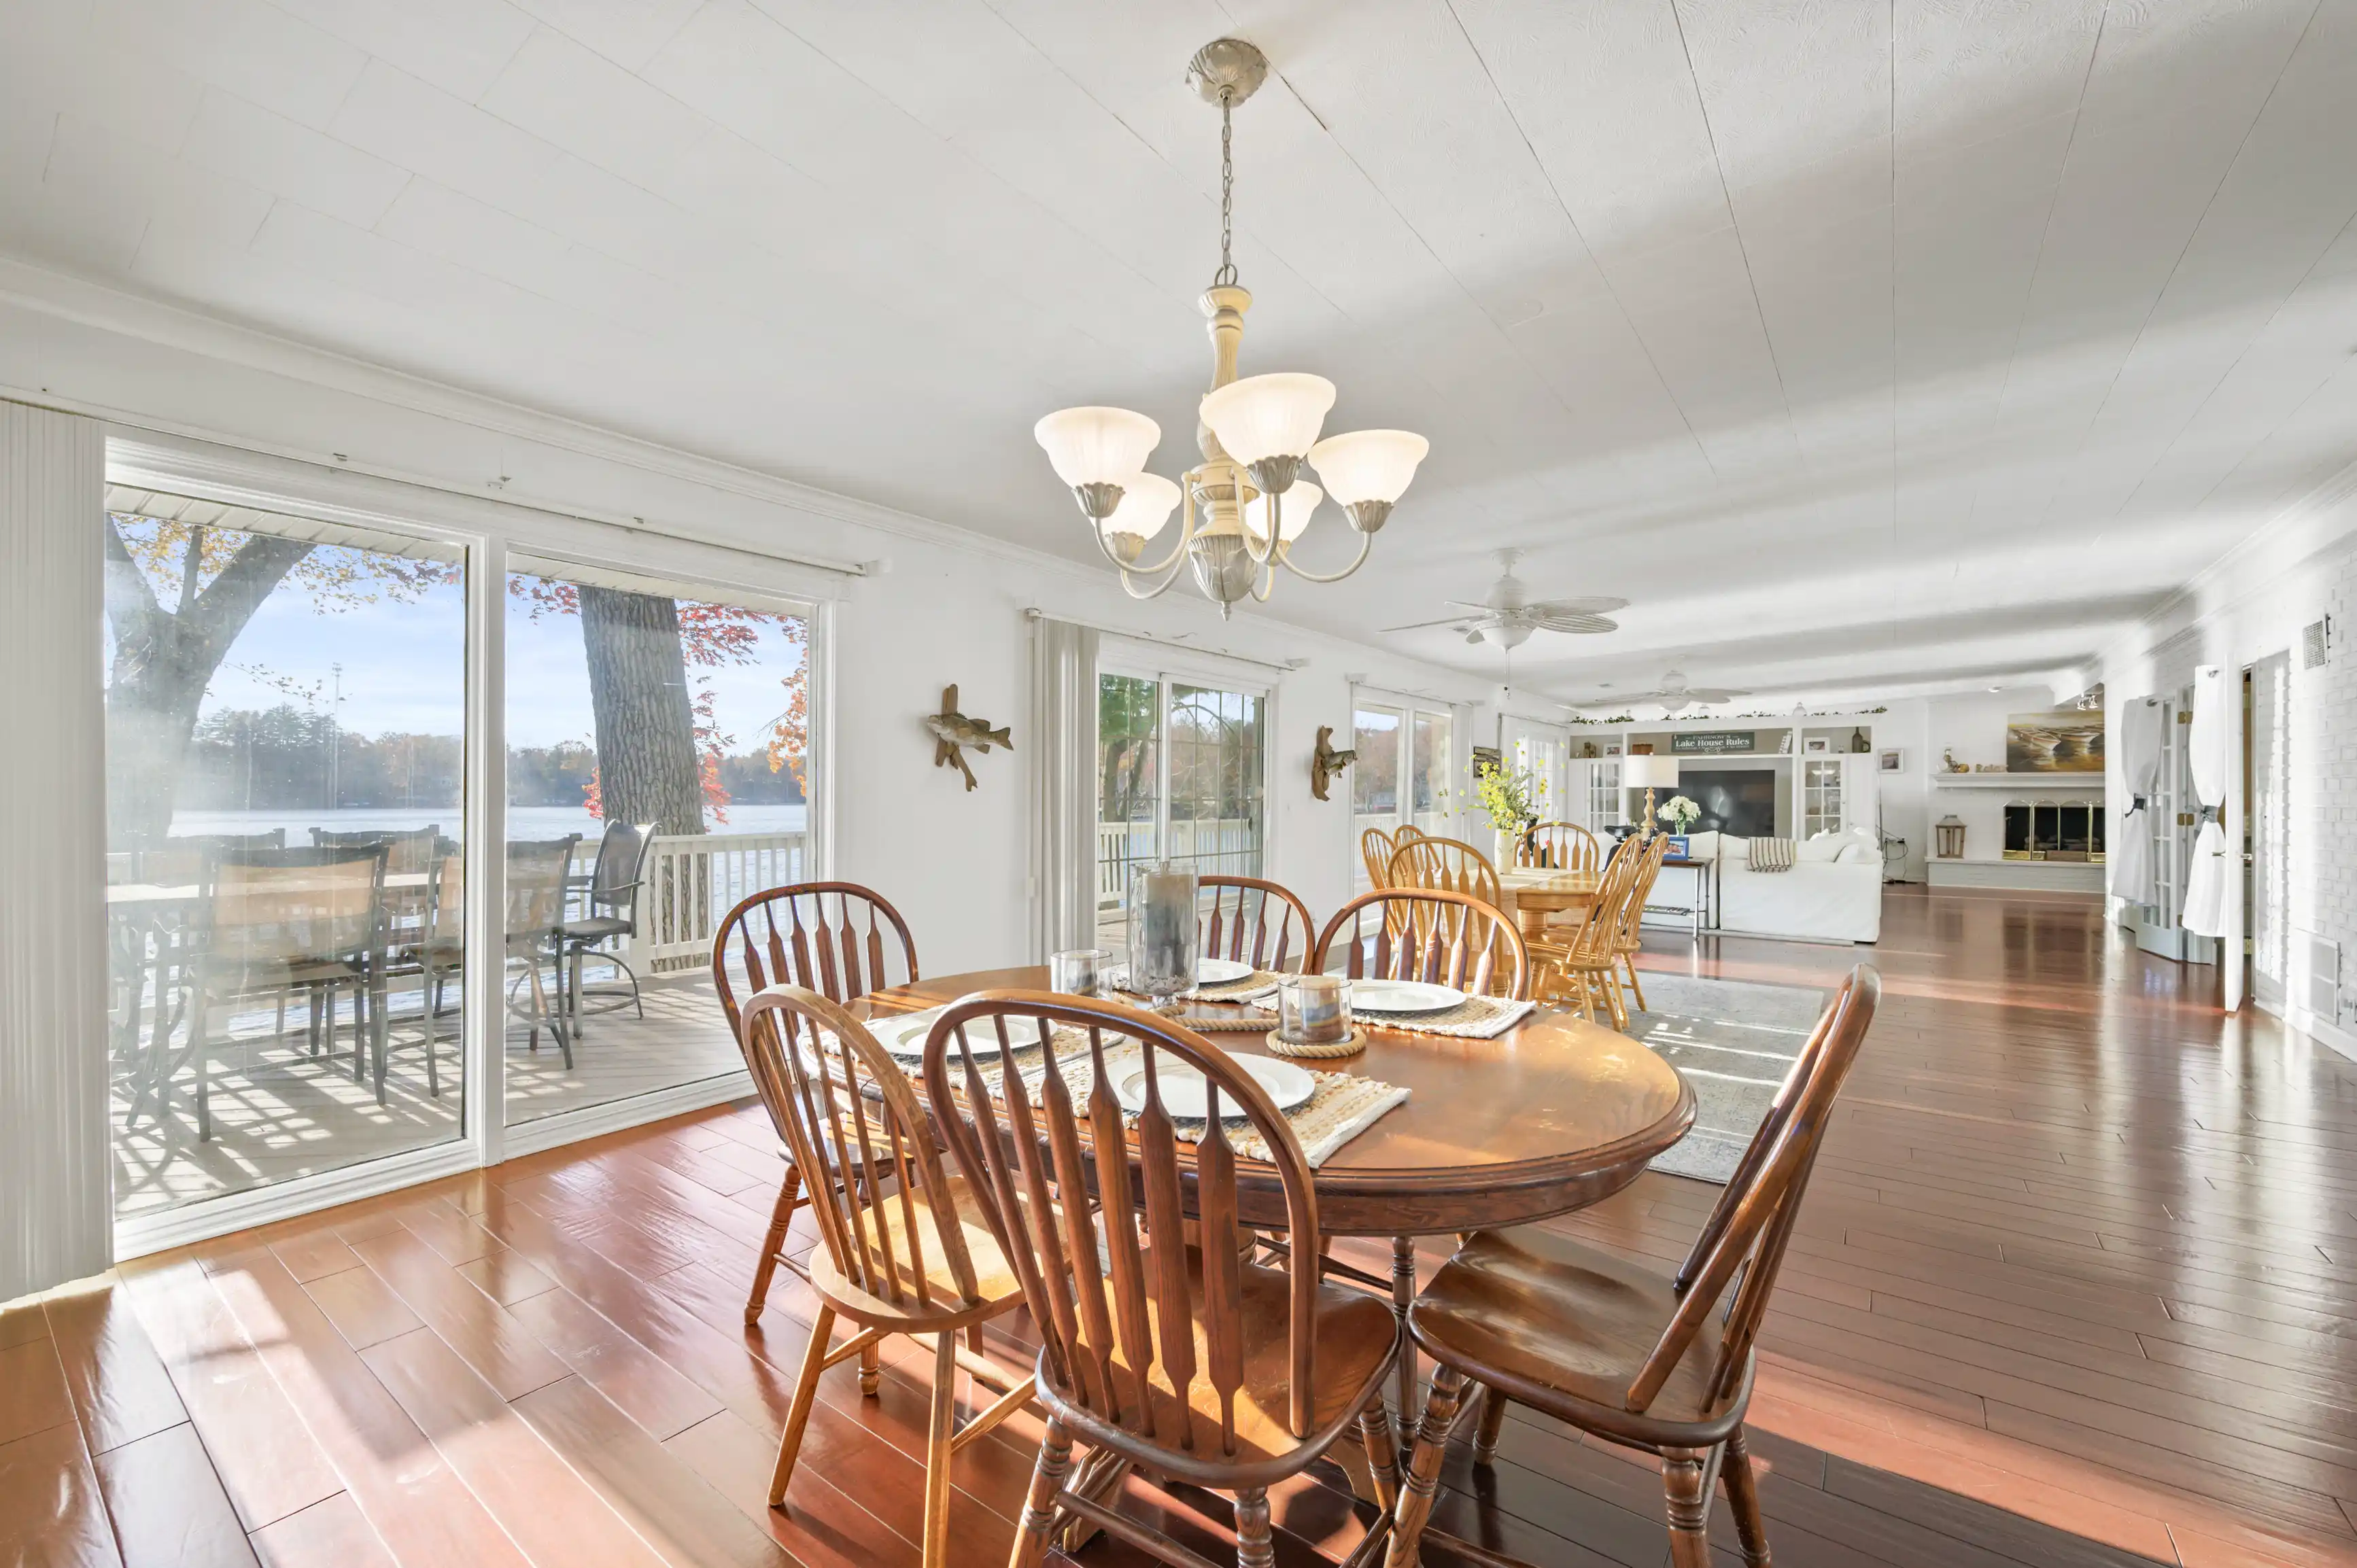 Bright and spacious dining room with a wooden oval table and chairs, opening onto a sunny deck overlooking a lake through sliding glass doors.